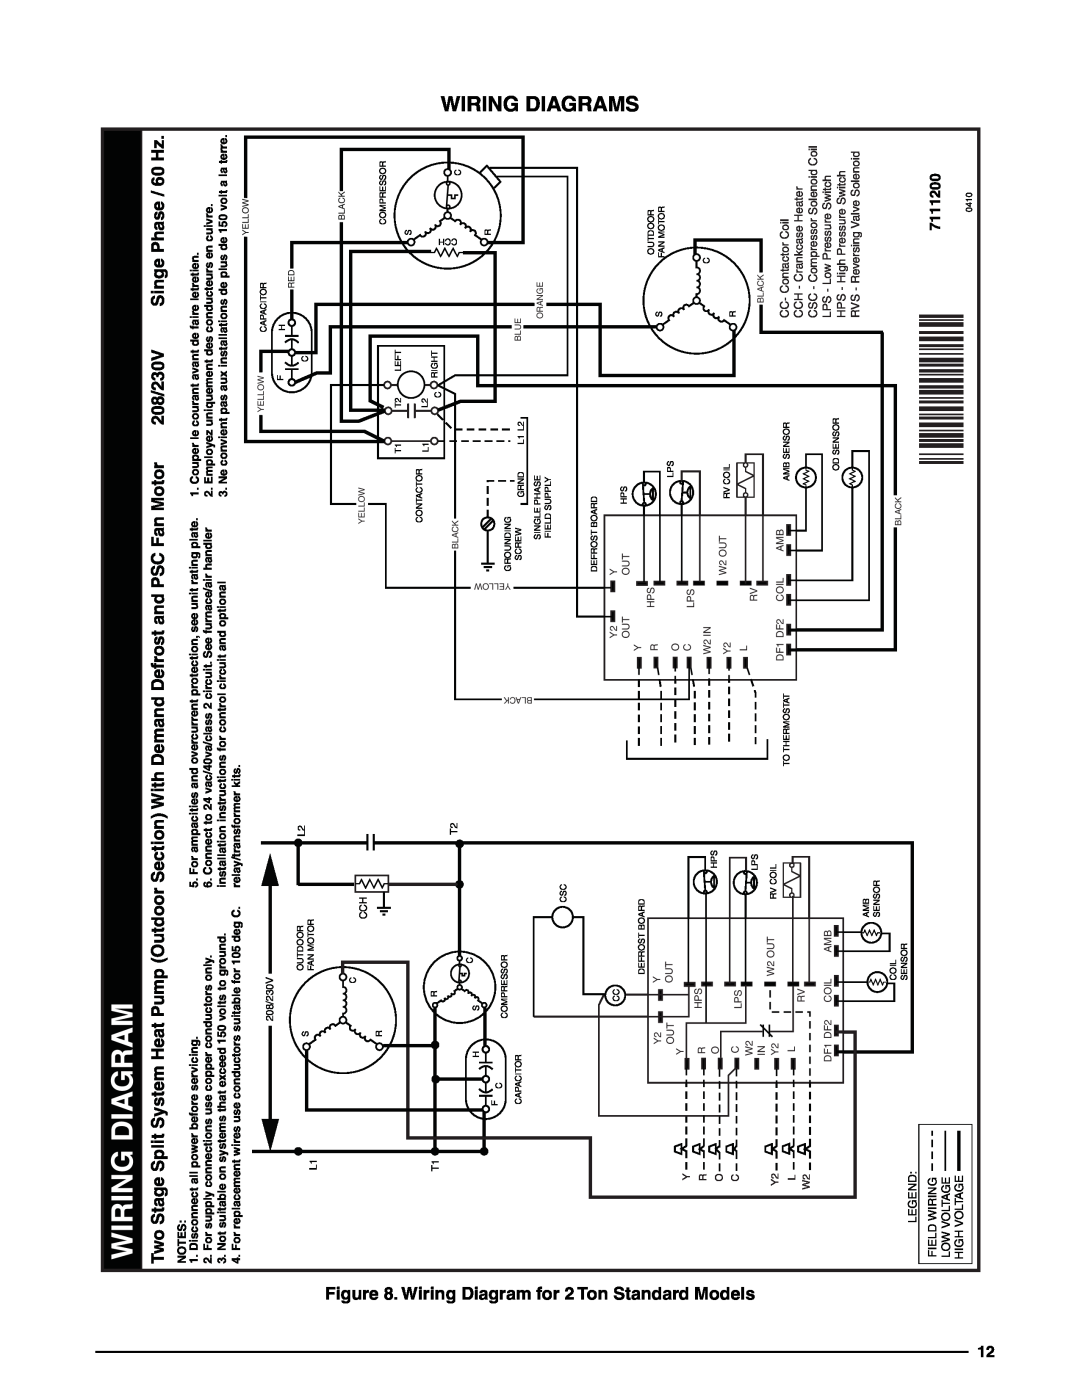 Heat Controller R-410A Wiring Diagram, 208/230V, Singe Phase / 60 Hz, CC- Contactor Coil, CCH - Crankcase Heater, W2 OUT 